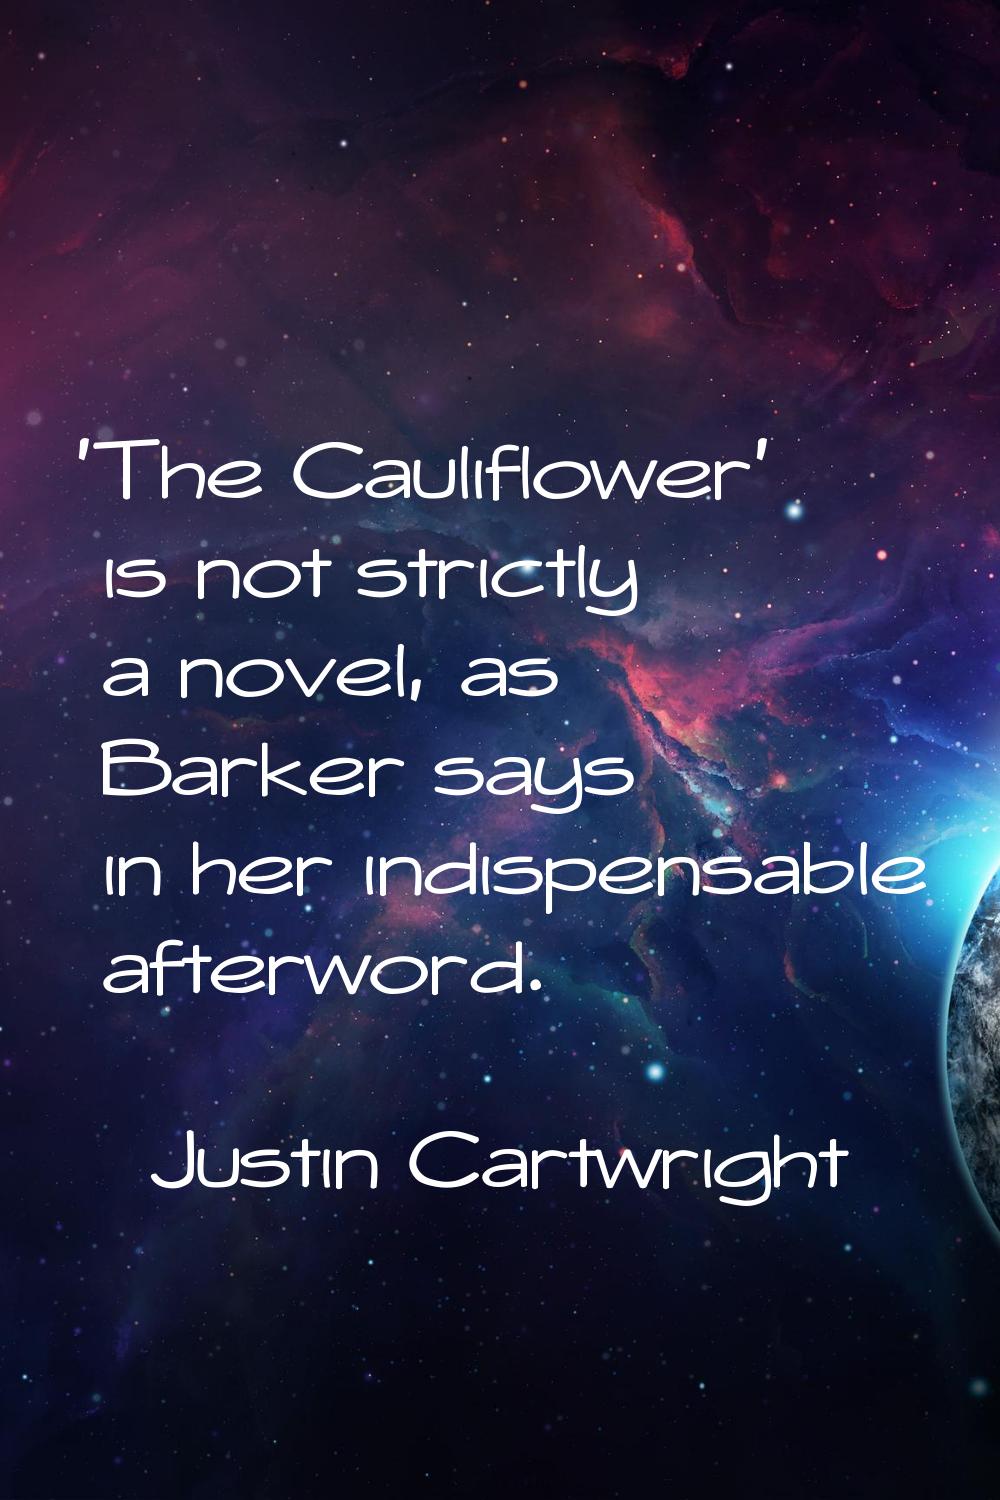 'The Cauliflower' is not strictly a novel, as Barker says in her indispensable afterword.